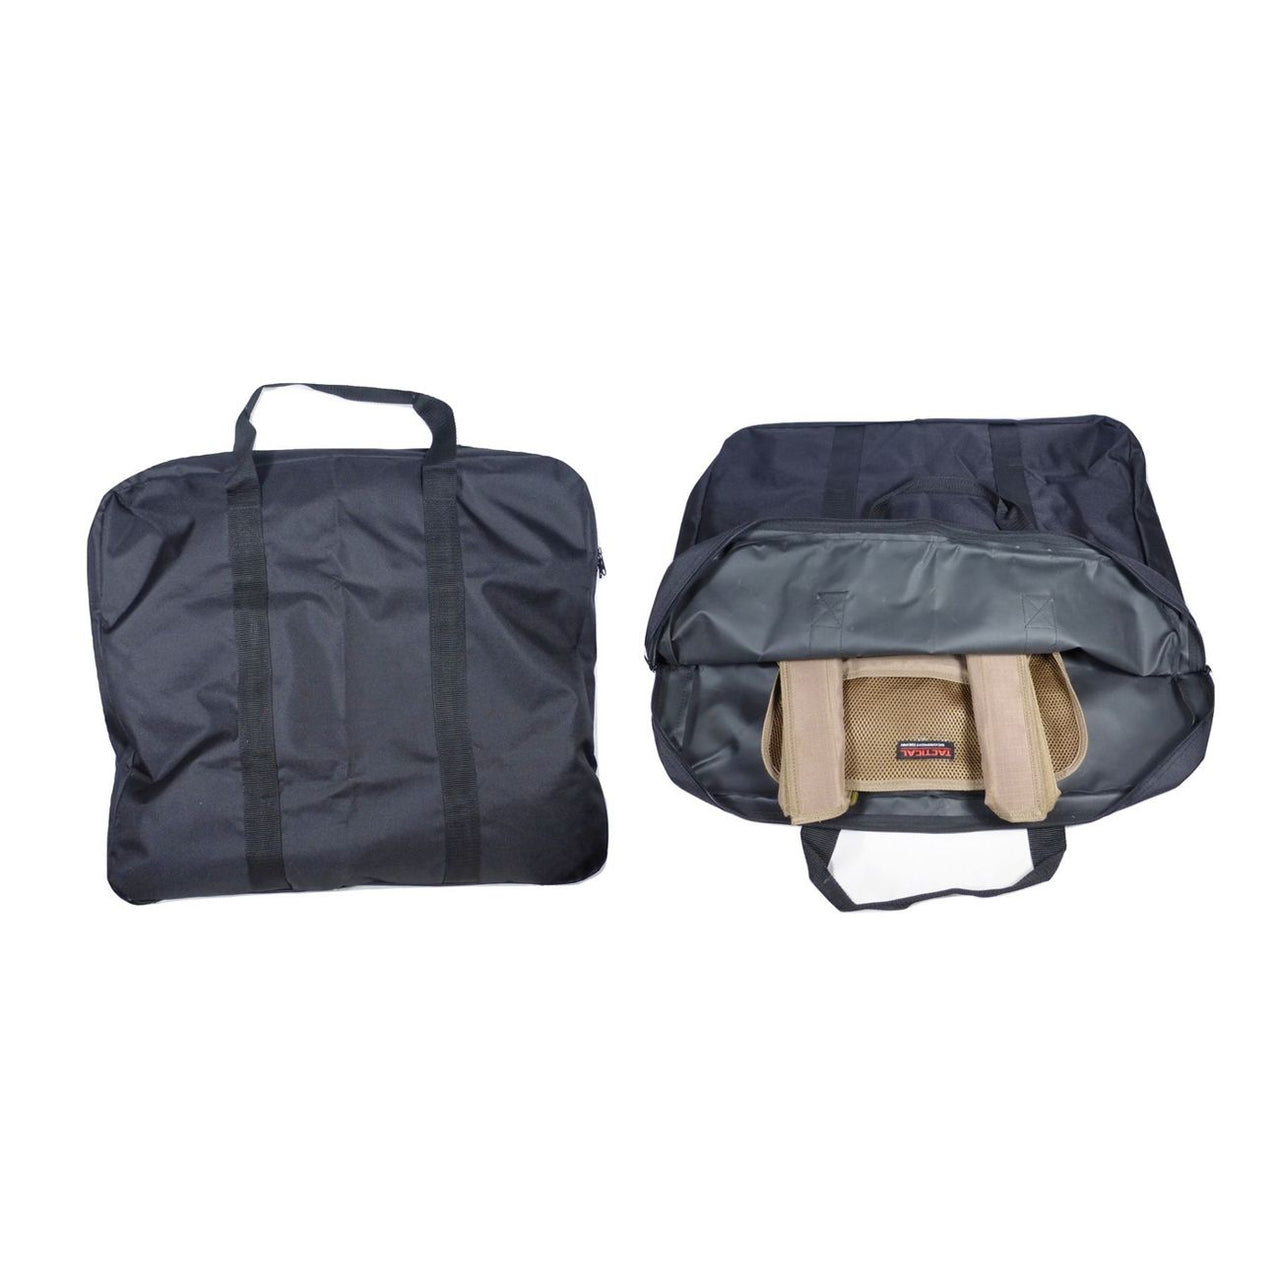 A Tactical Scorpion Gear Body Armor Carrier and Plates Storage Tote Bag Black with two compartments.